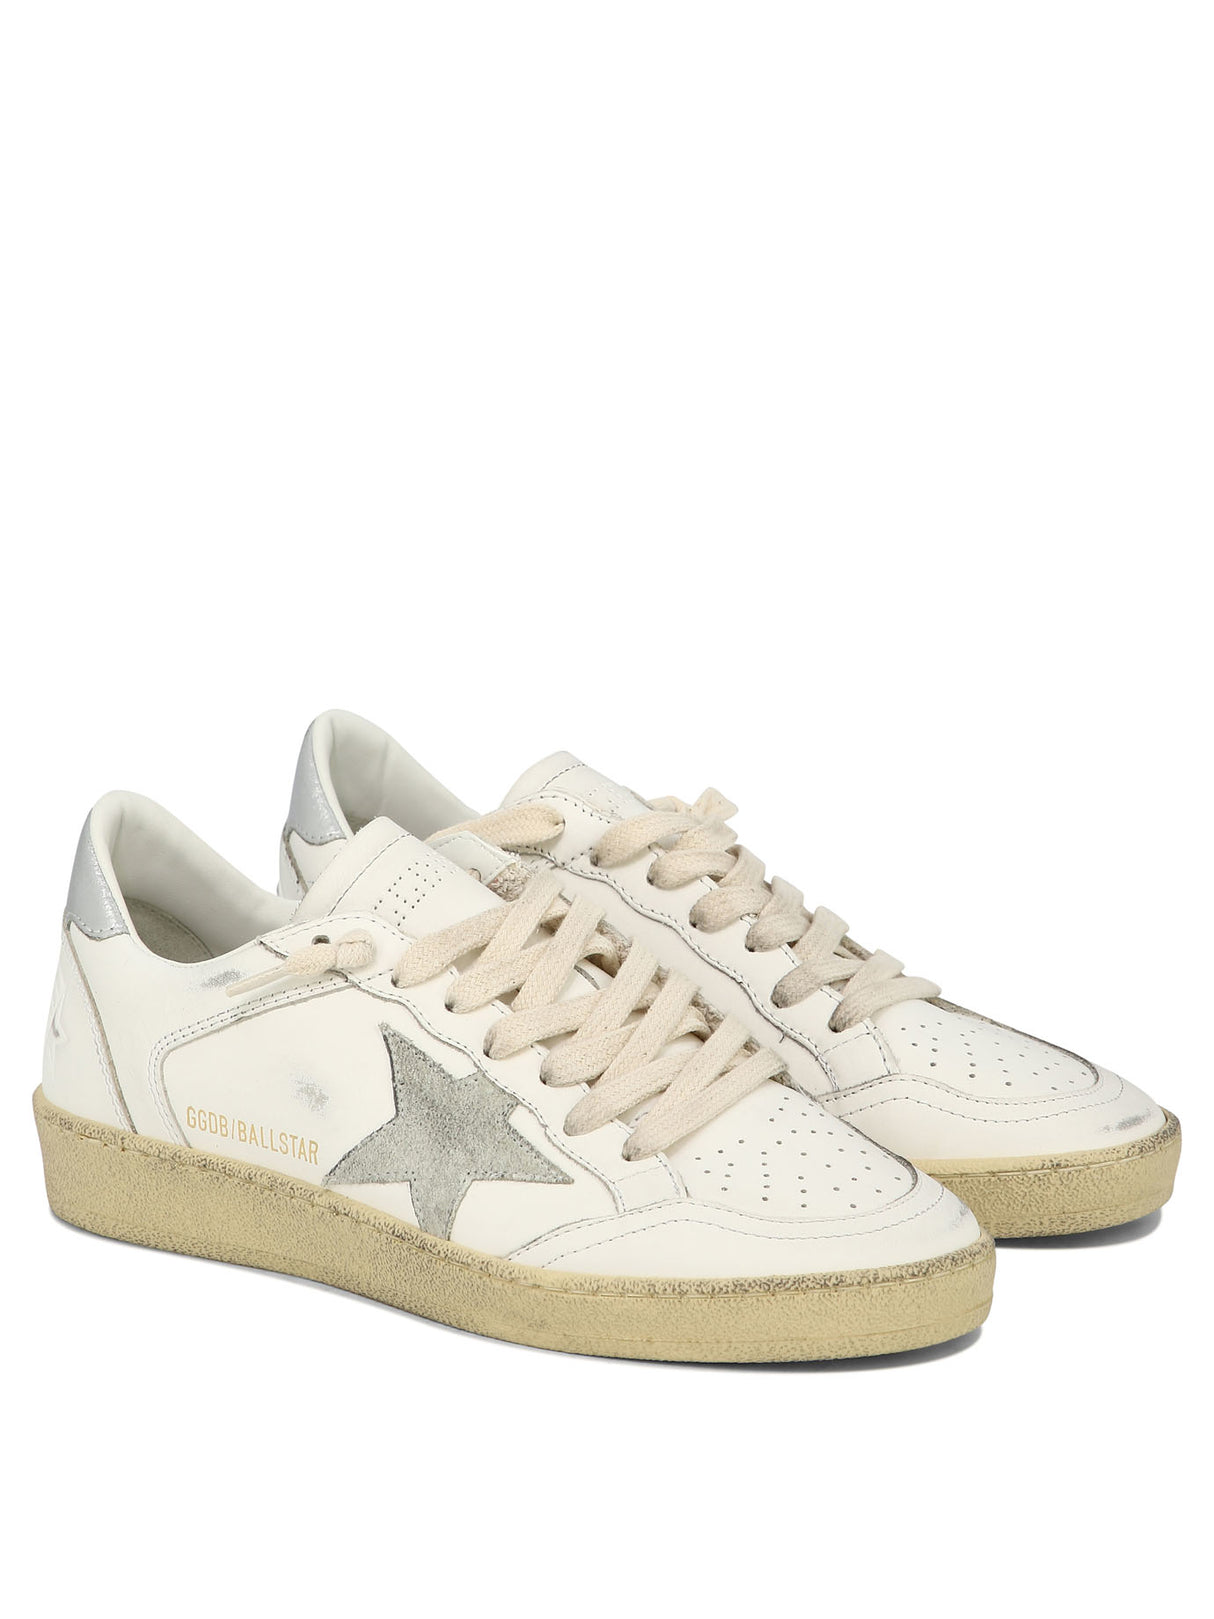 GOLDEN GOOSE Classic White Leather Sneakers for Women